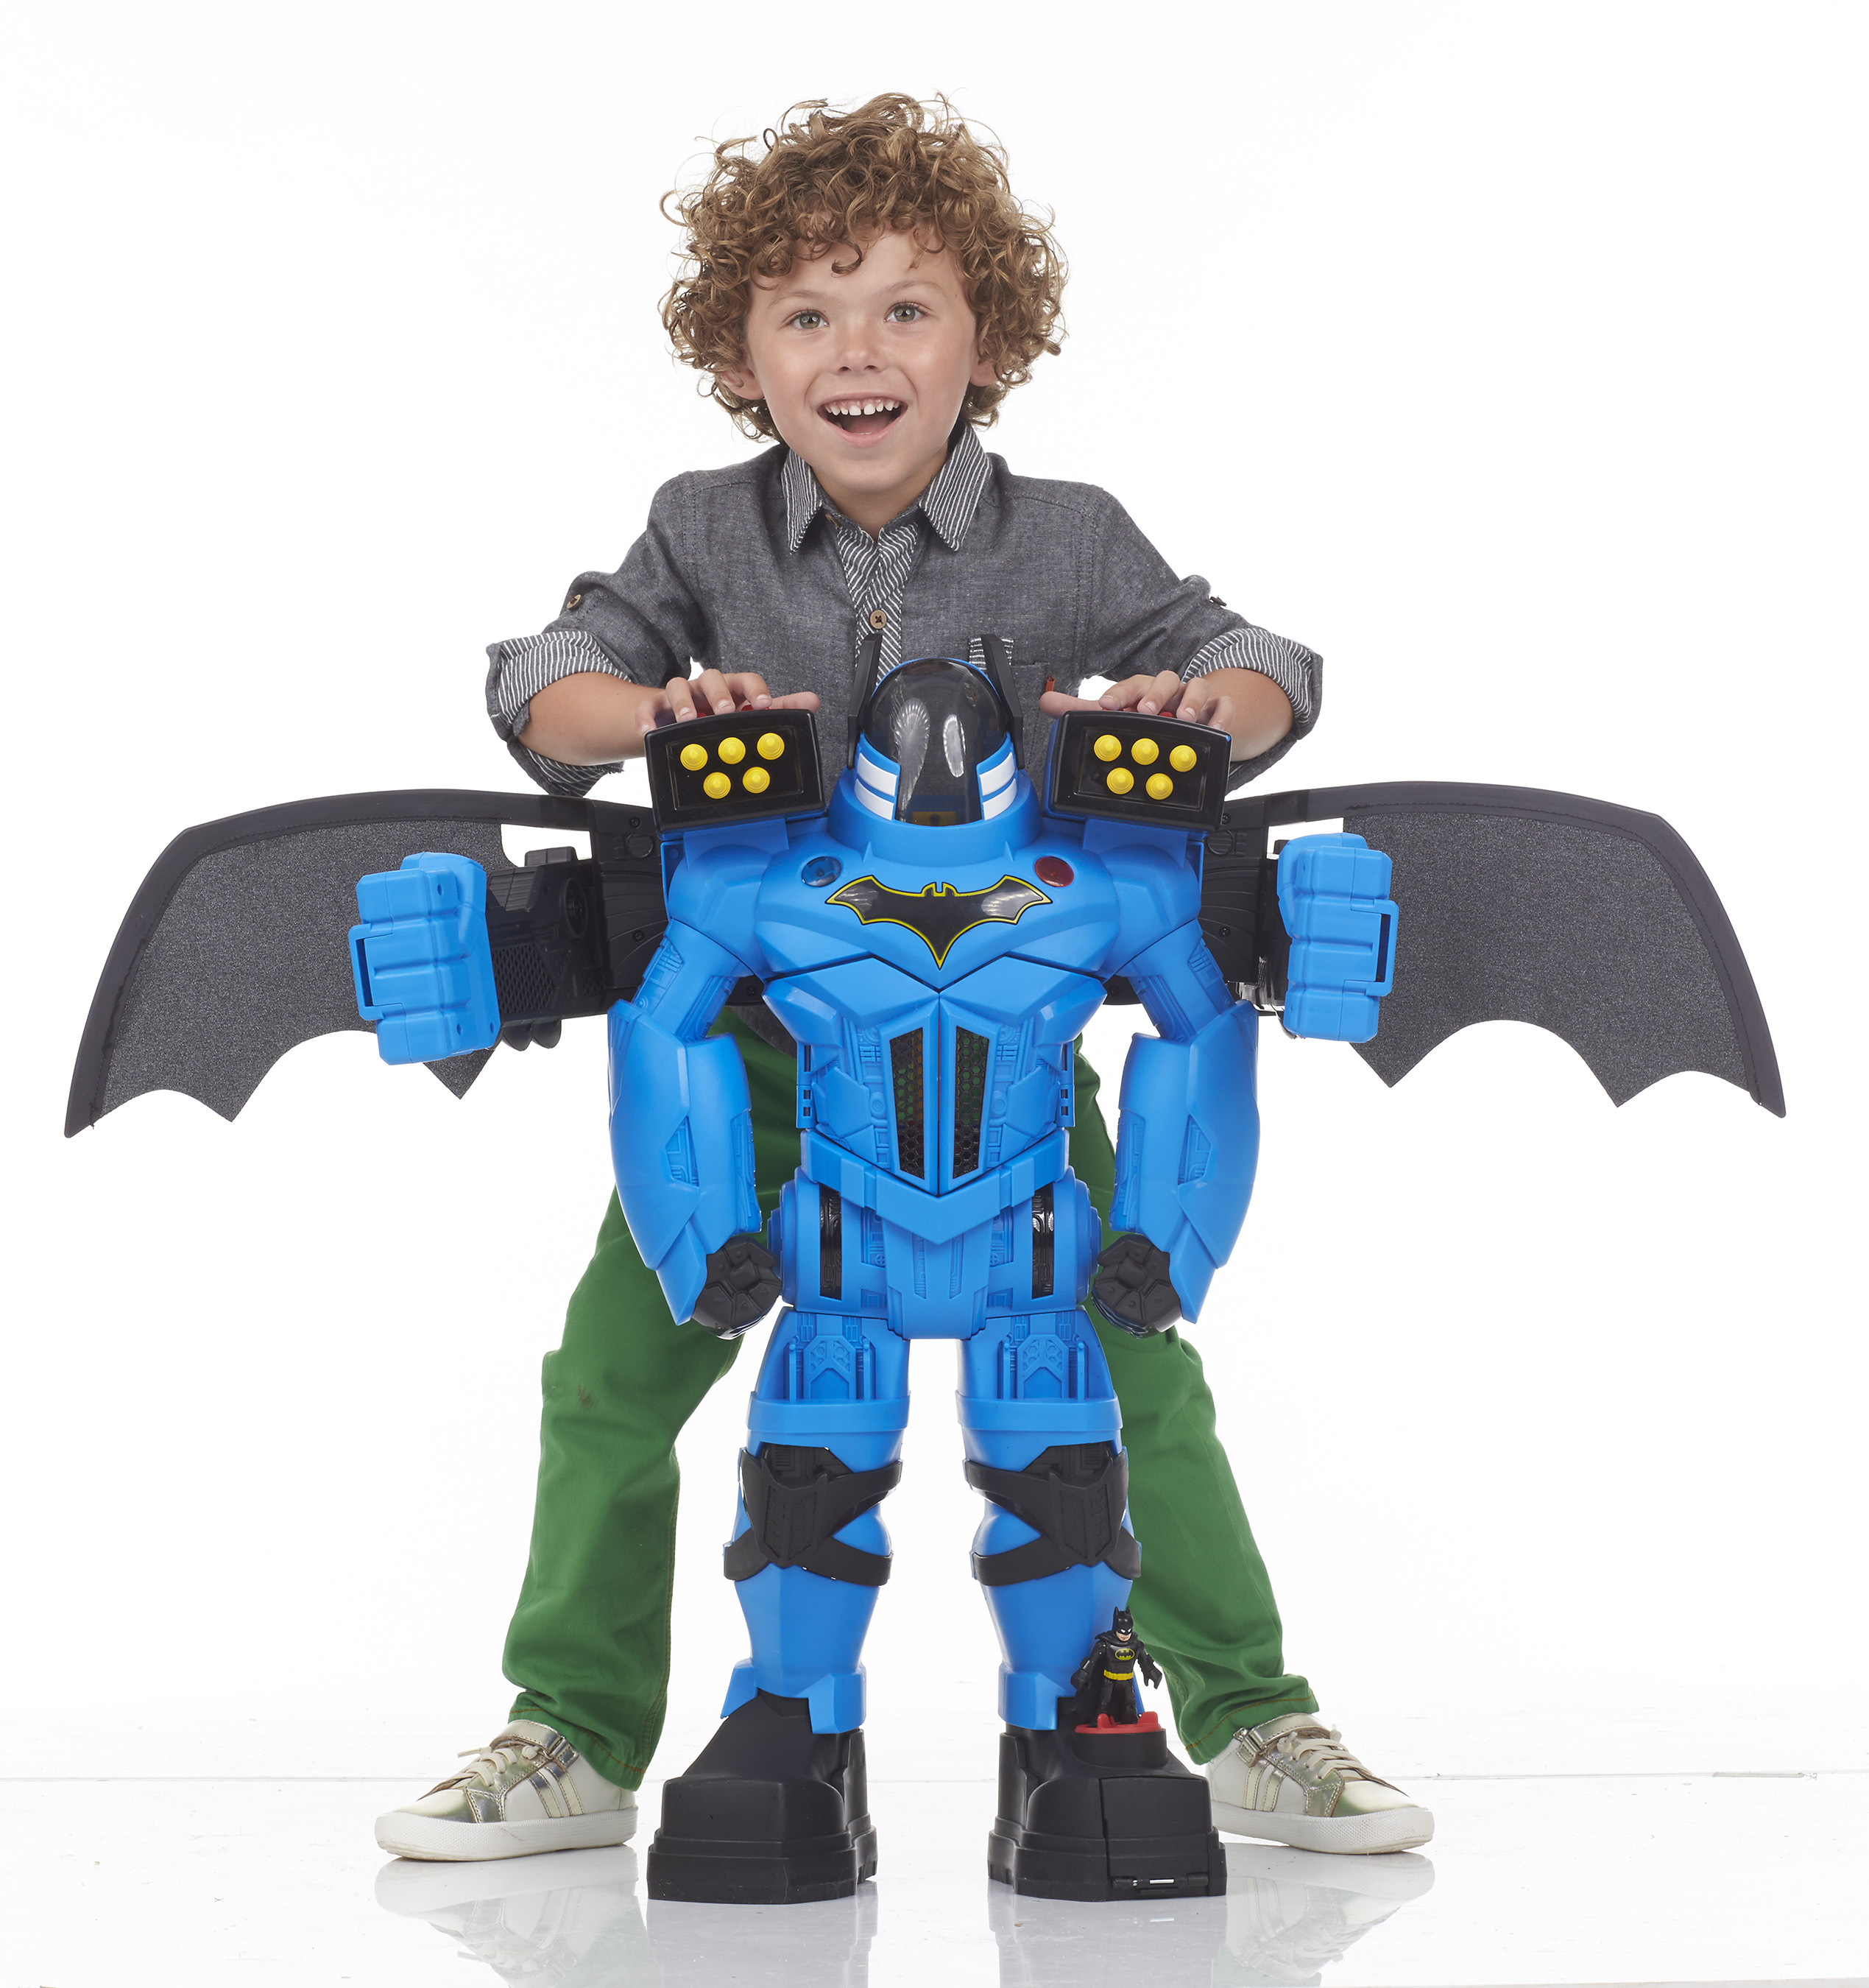 Imaginext® DC Super Friends™ Batbot Xtreme from Fisher-Price®